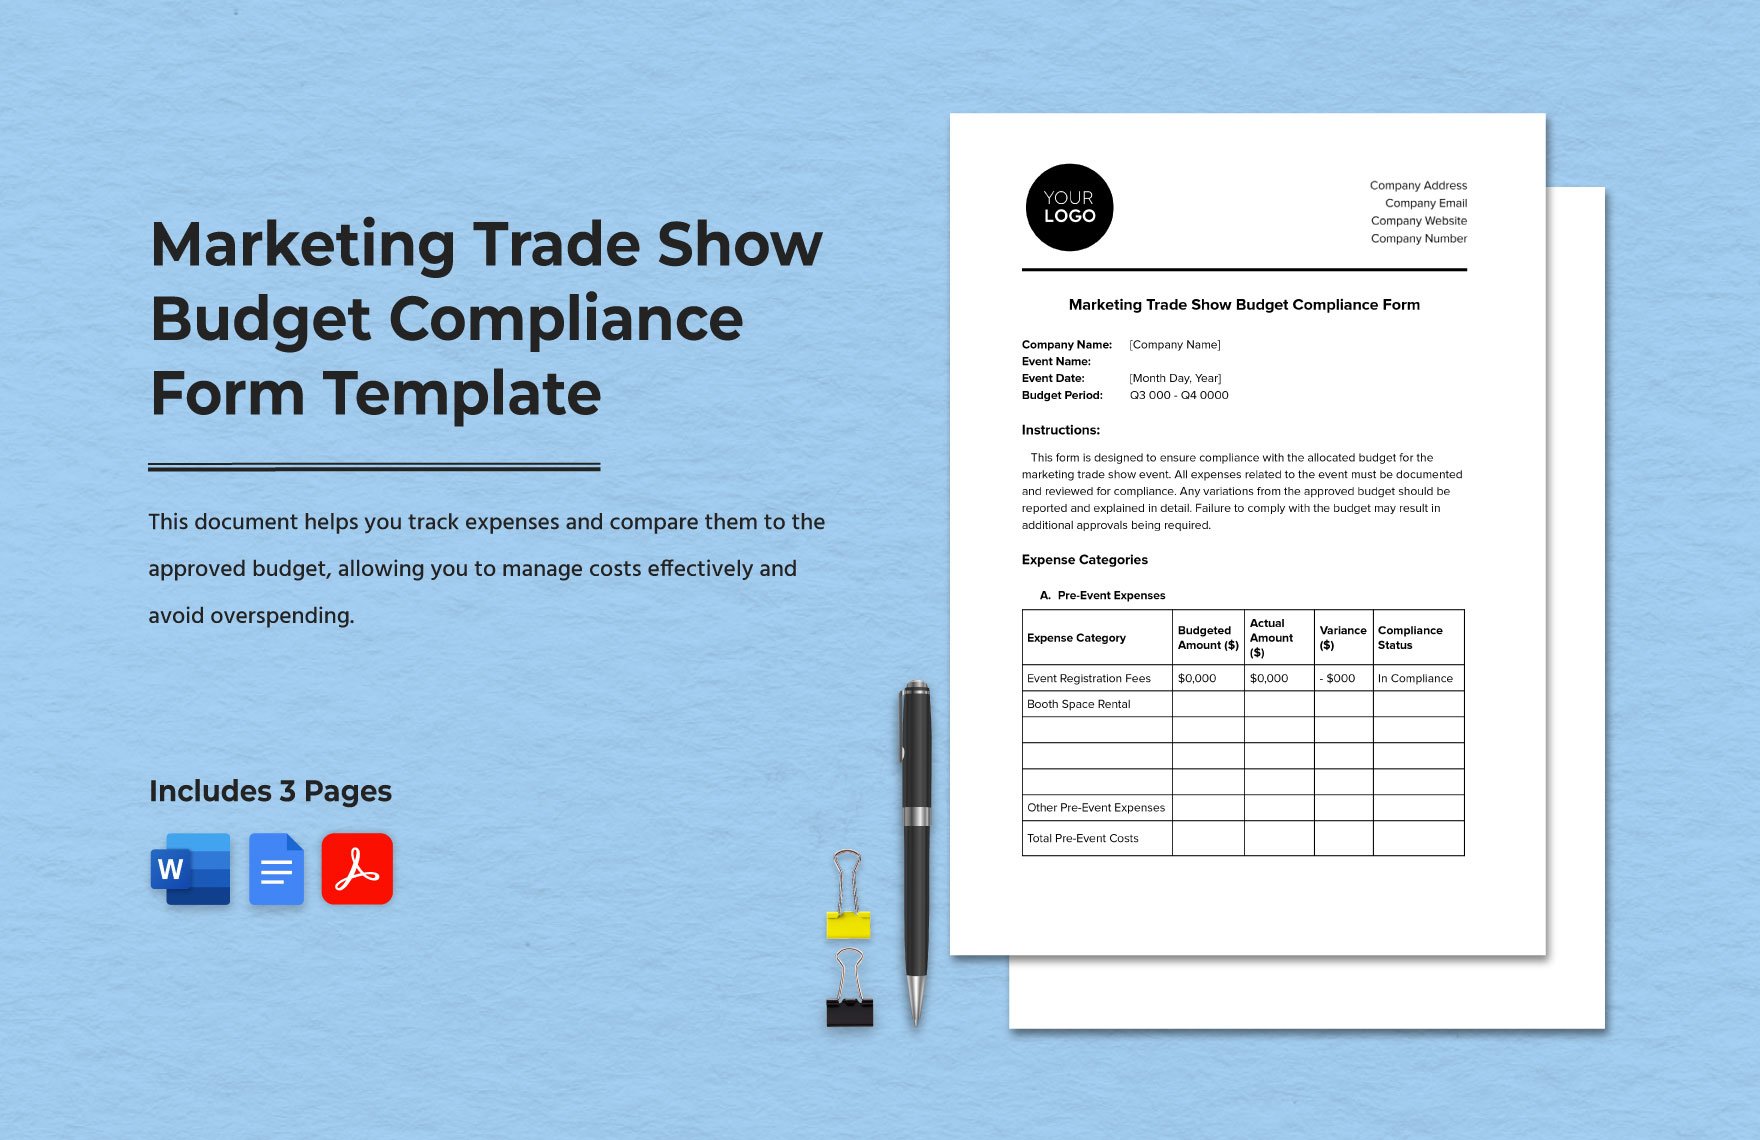 Marketing Trade Show Budget Compliance Form Template in Word, Google Docs, PDF